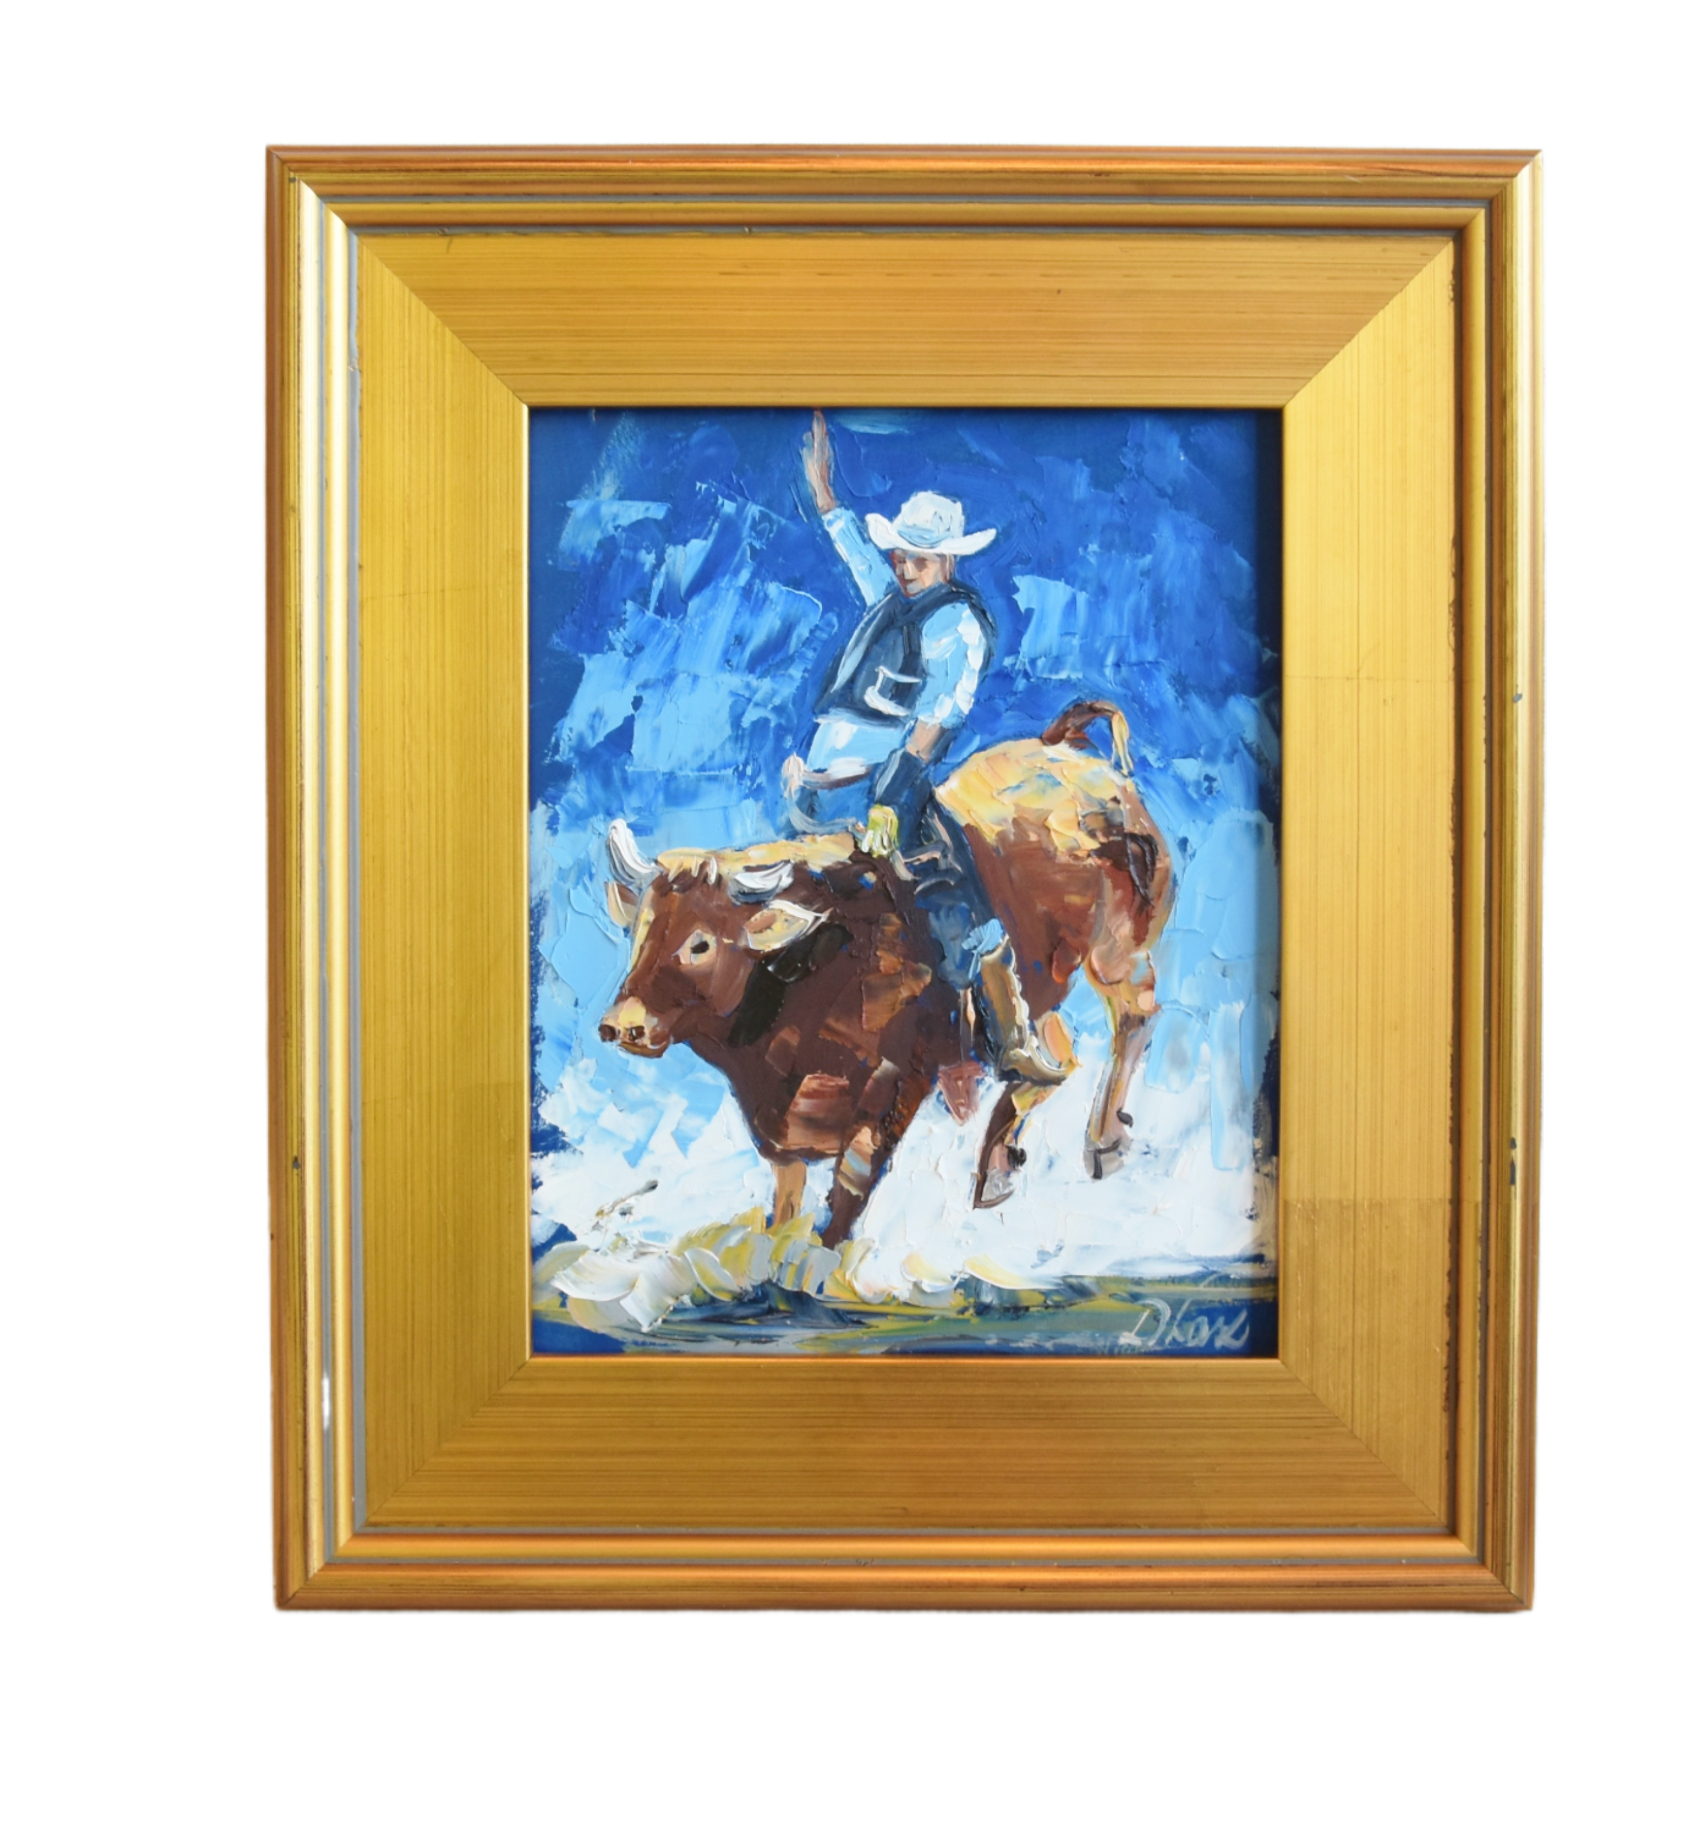 Western Rodeo Cowboy Bull Rider Painting~P77683492